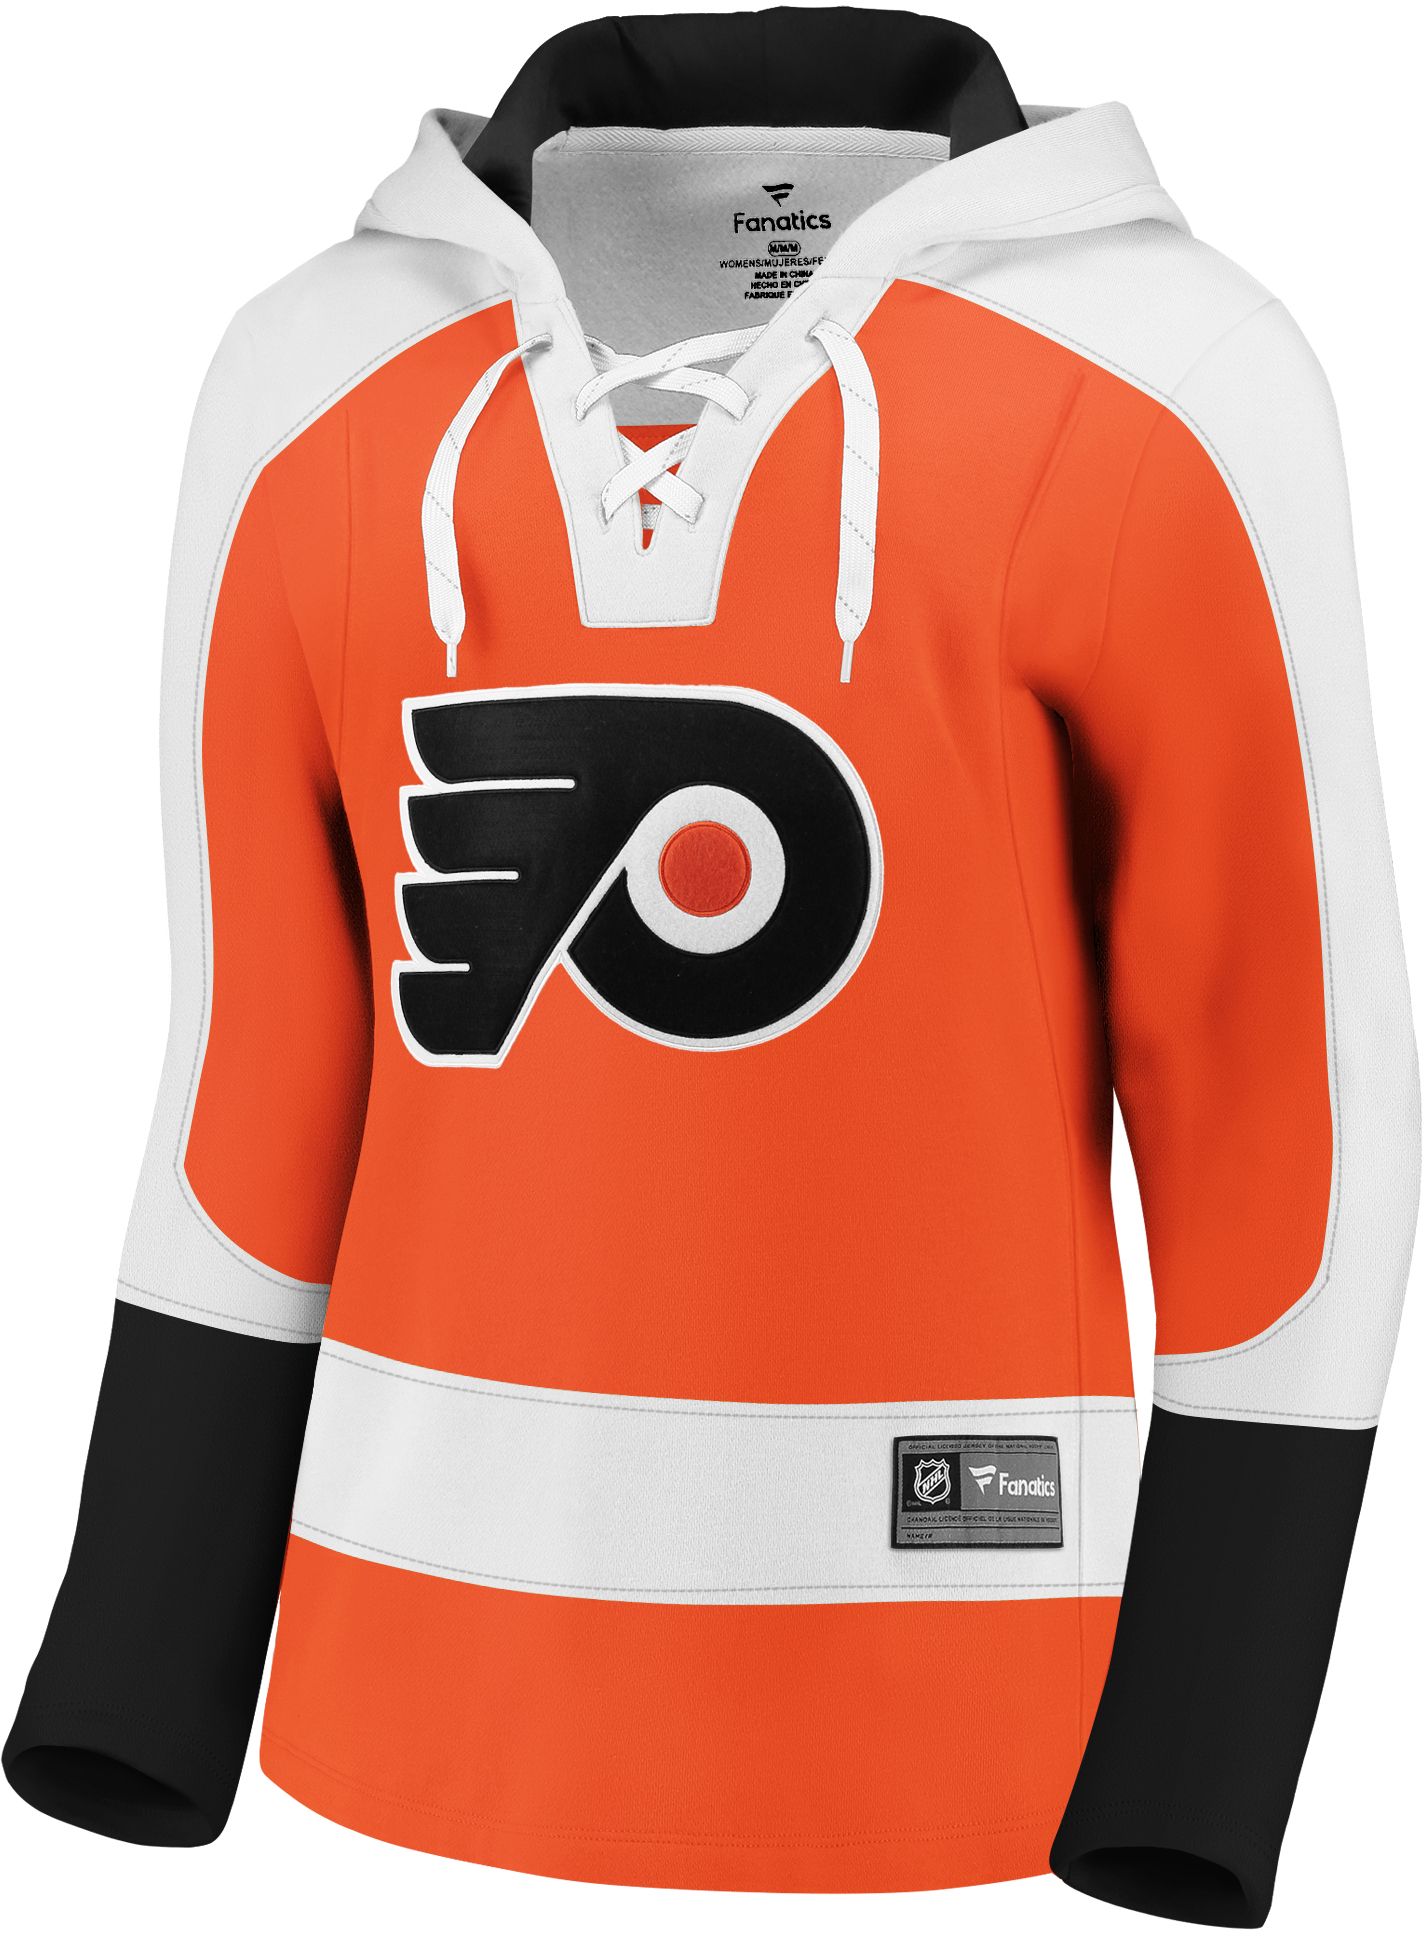 flyers lace up jersey